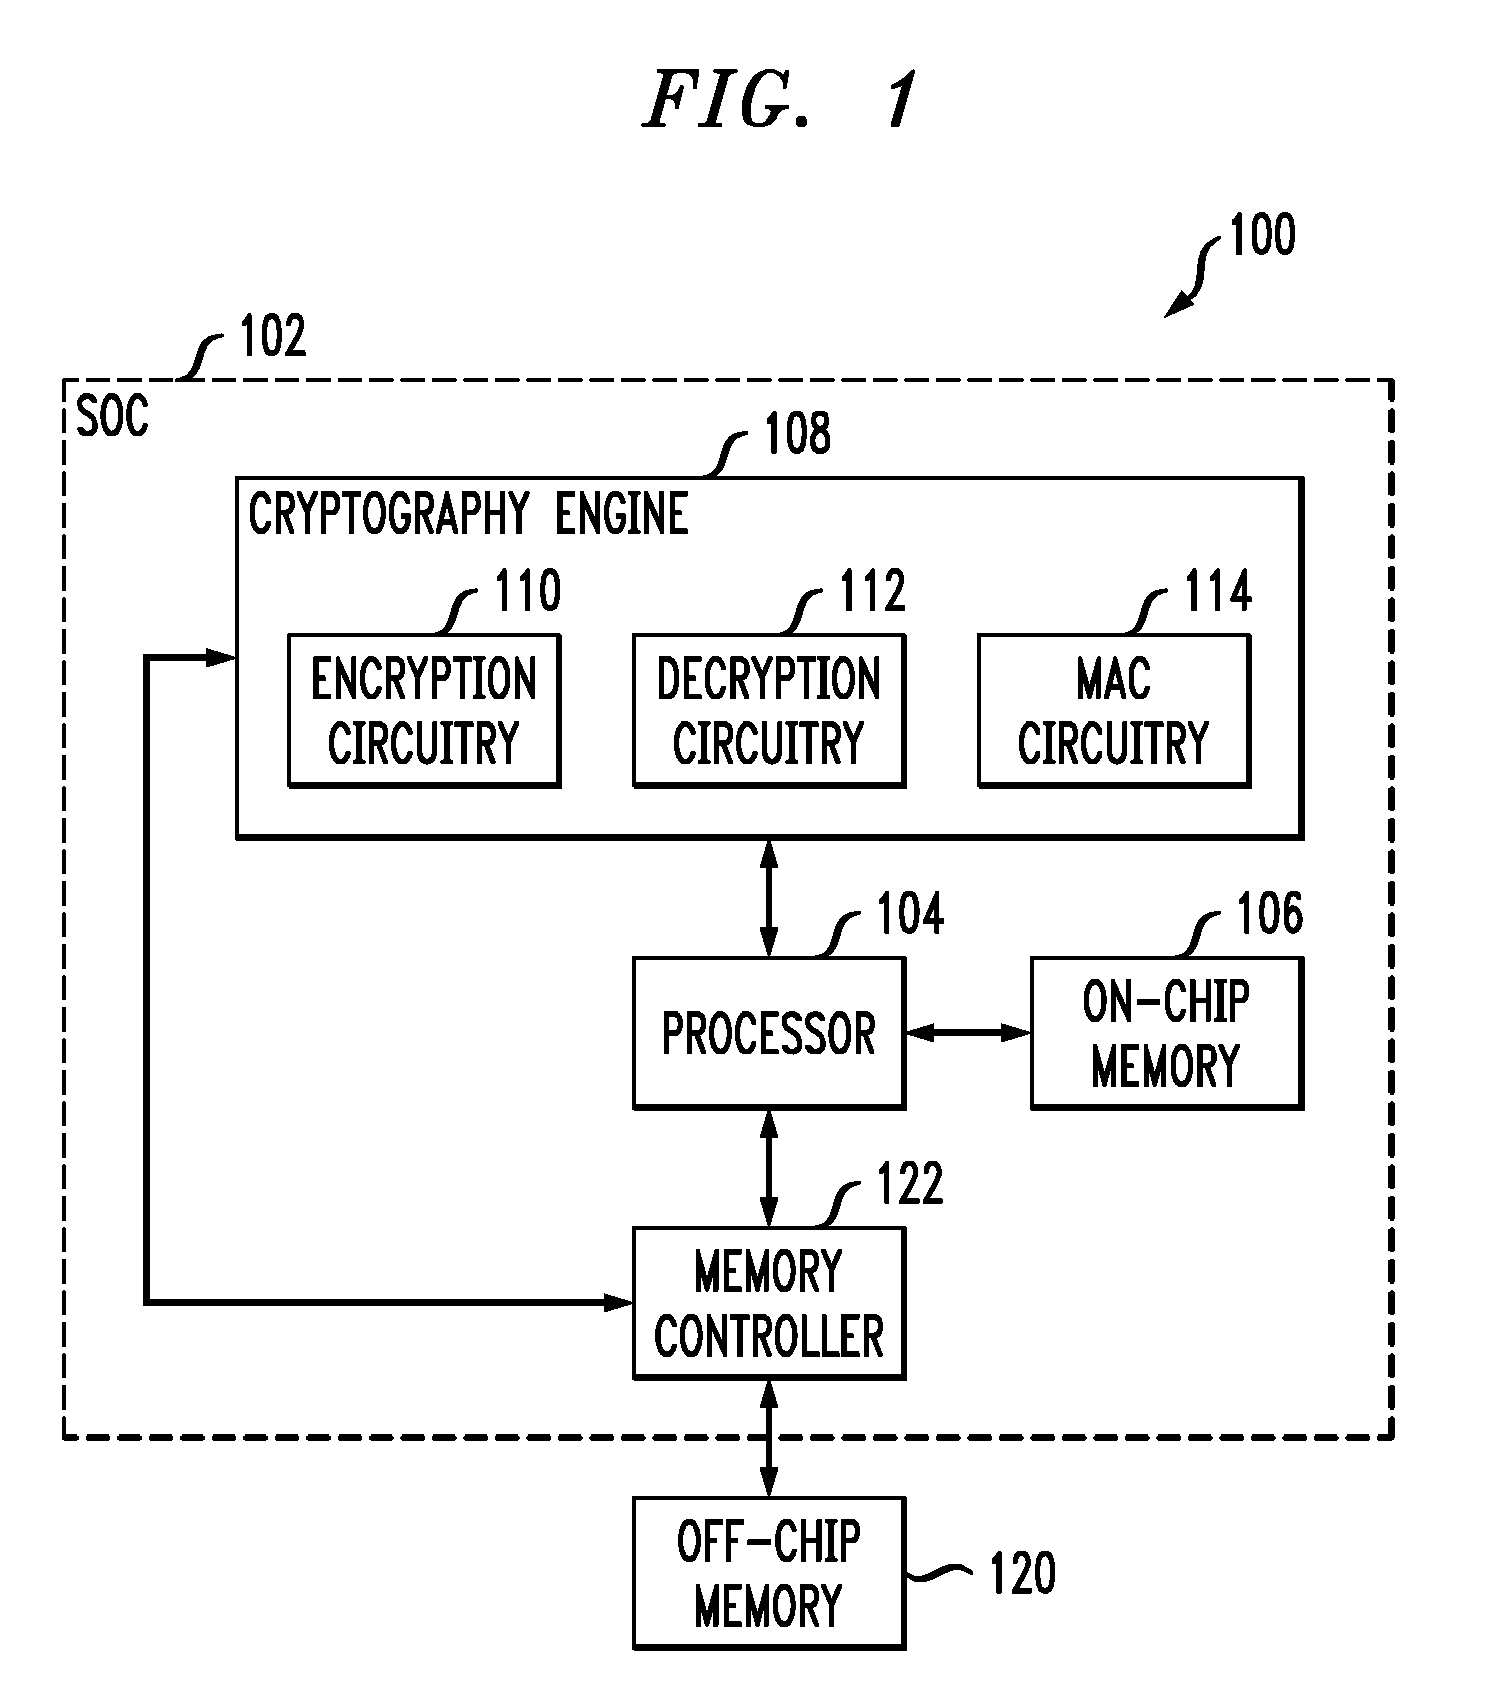 Storage and retrieval of encrypted data blocks with in-line message authentication codes